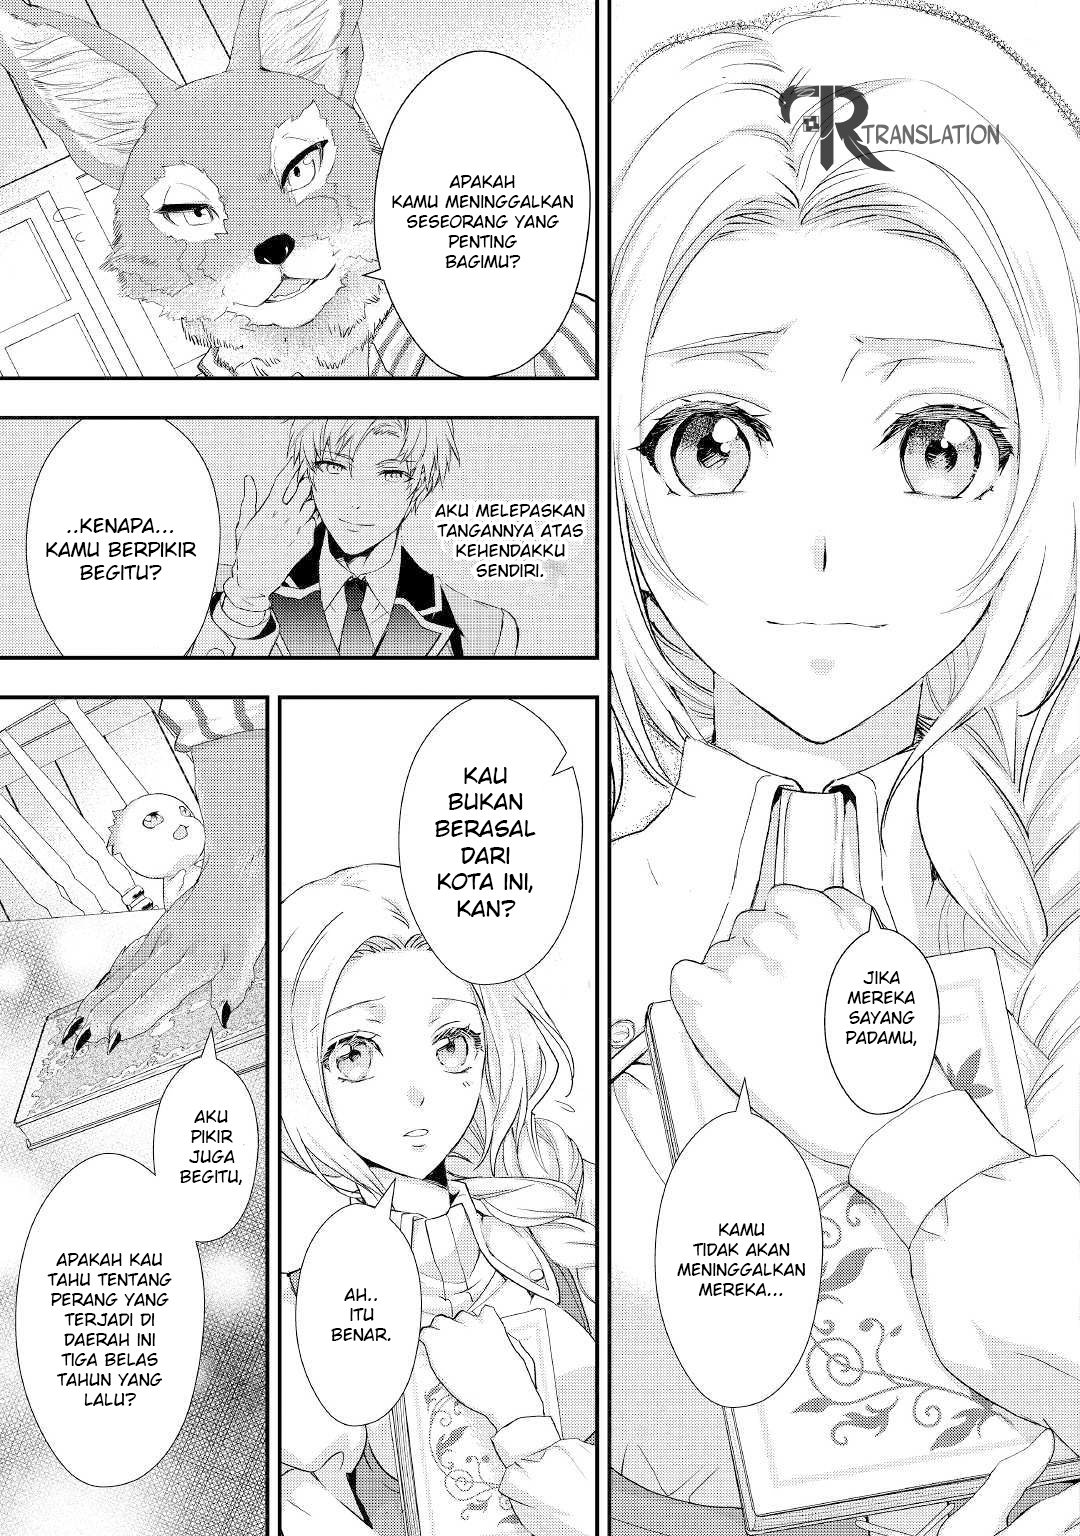 Milady Just Wants to Relax Chapter 10.2